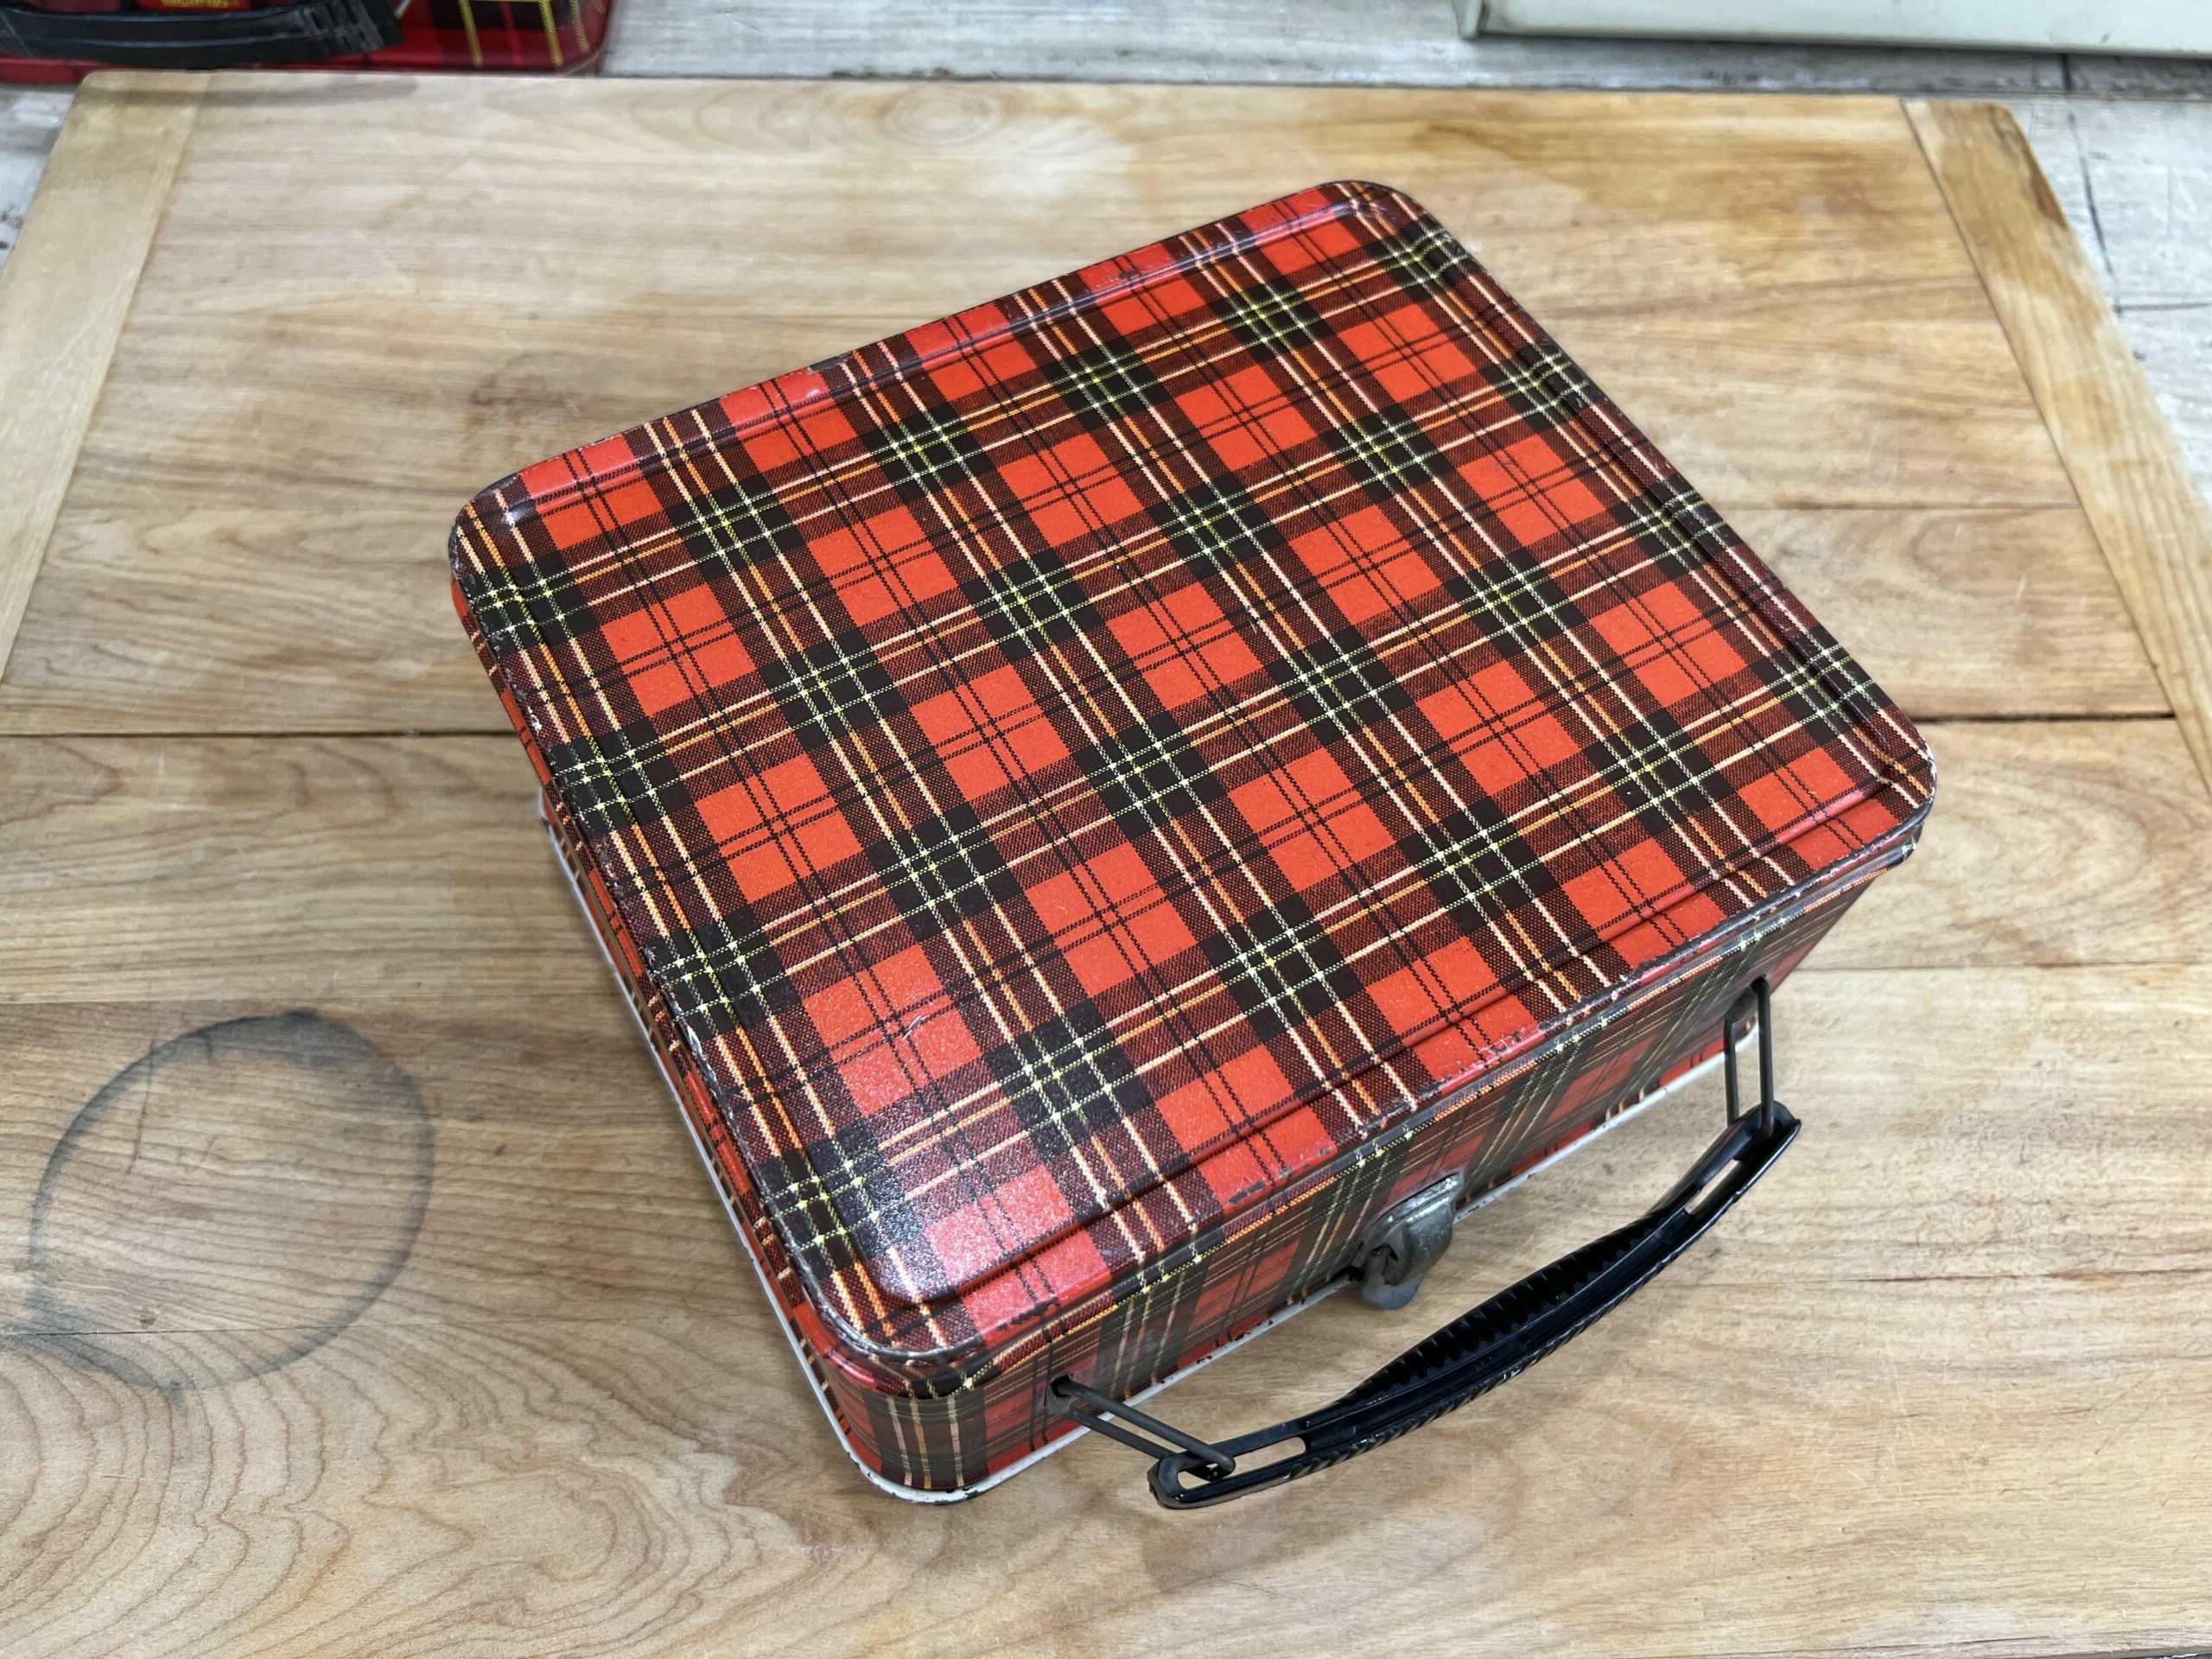 https://thejunkparlor.com/wp-content/uploads/2023/06/vintage-tartan-plaid-lunch-box-7-min-scaled-e1687268564726.jpg